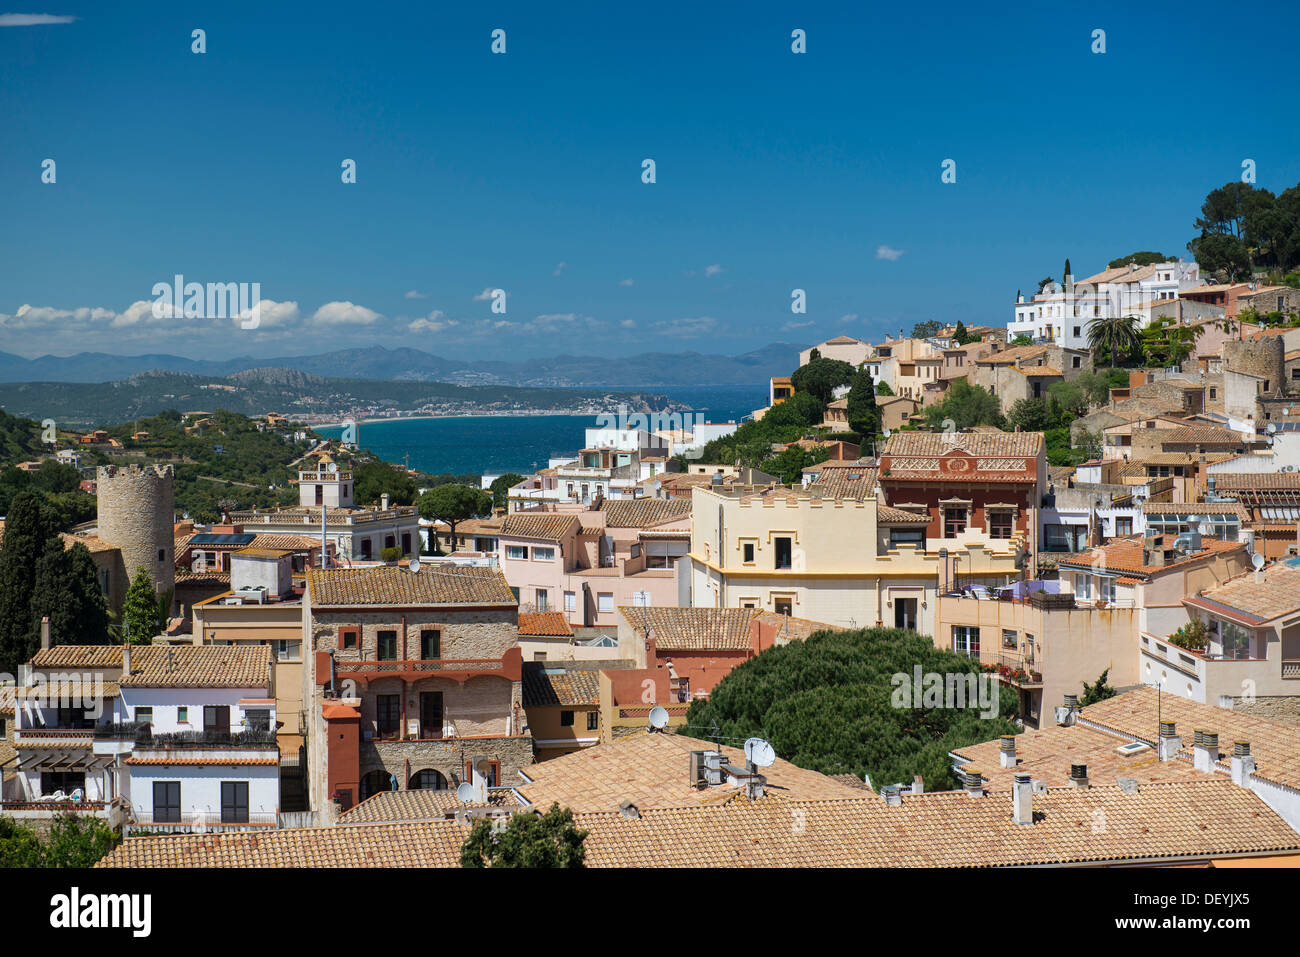 View of a small town by the sea, Begur, Costa Brava, Catalonia, Spain Stock Photo